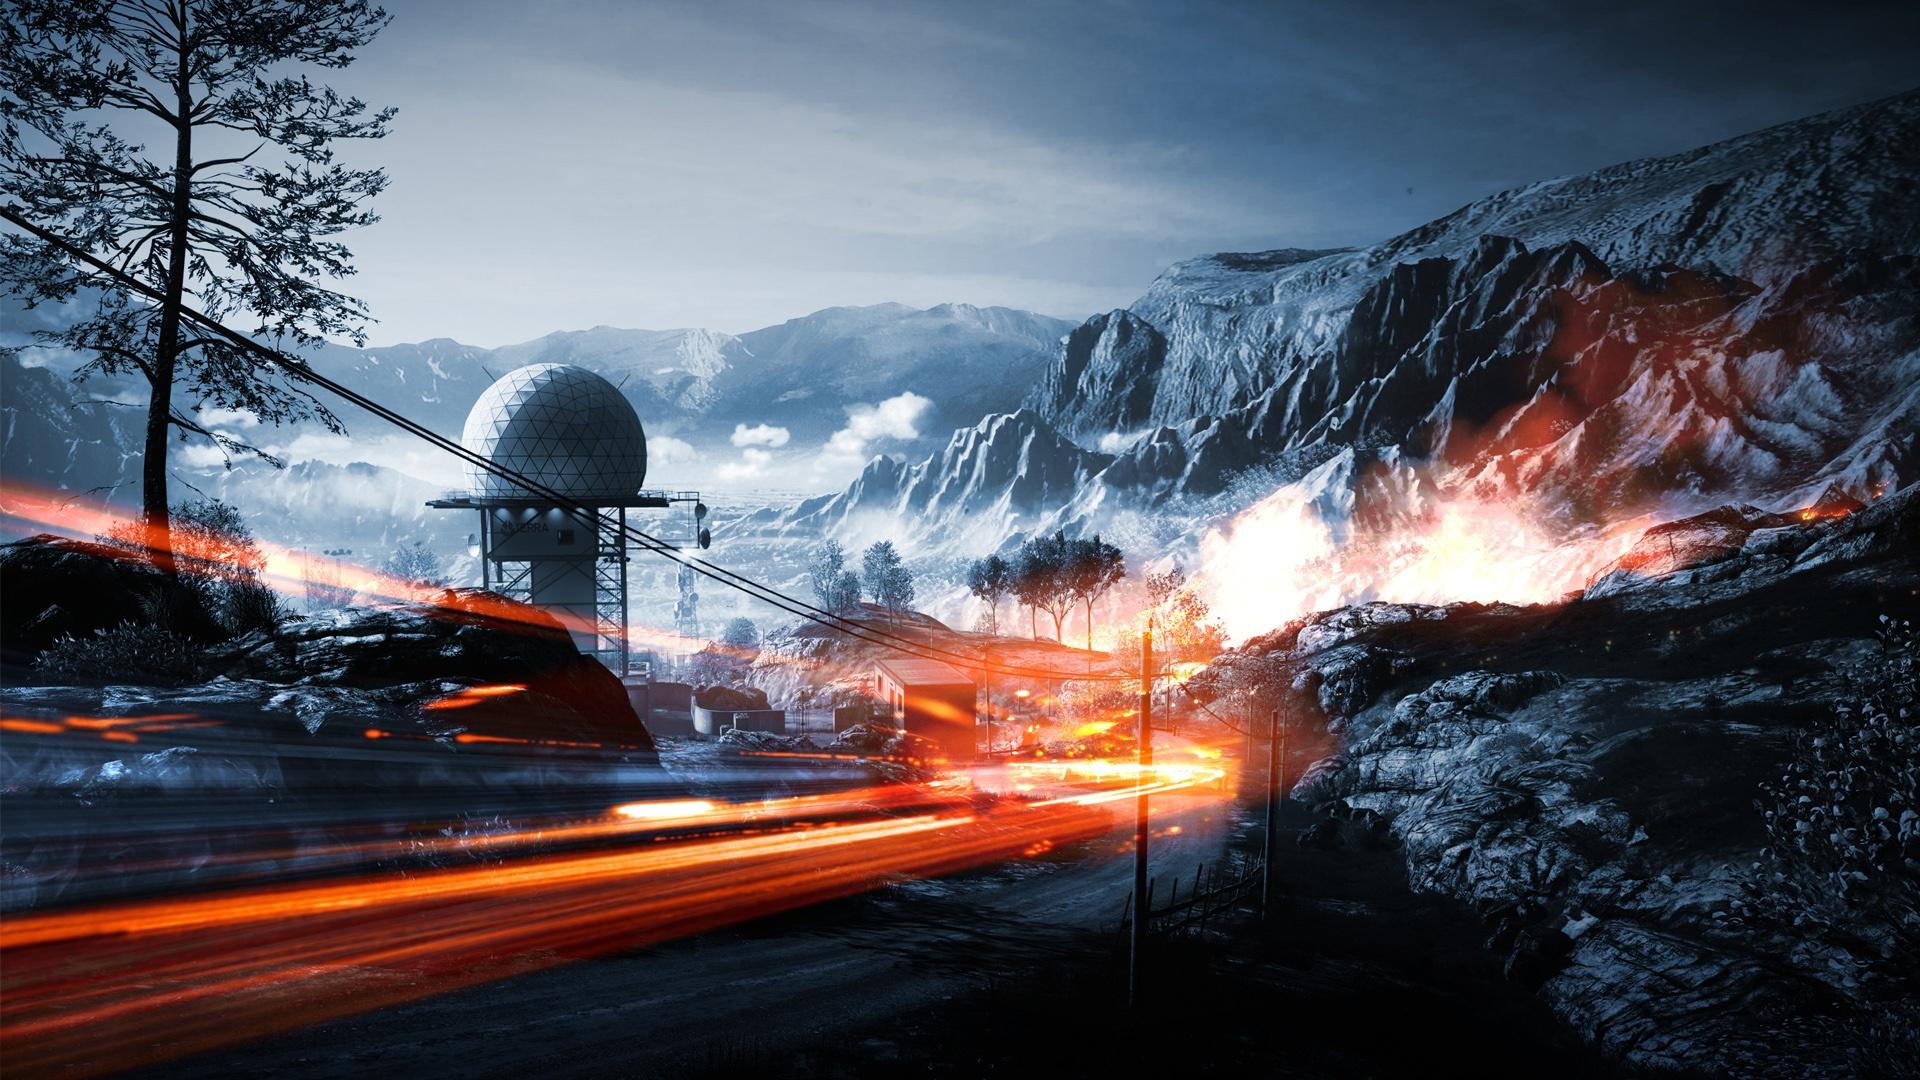 Wallpaper Video Game Battlefield 3 1920x1080 Full HD 2K Picture, Image